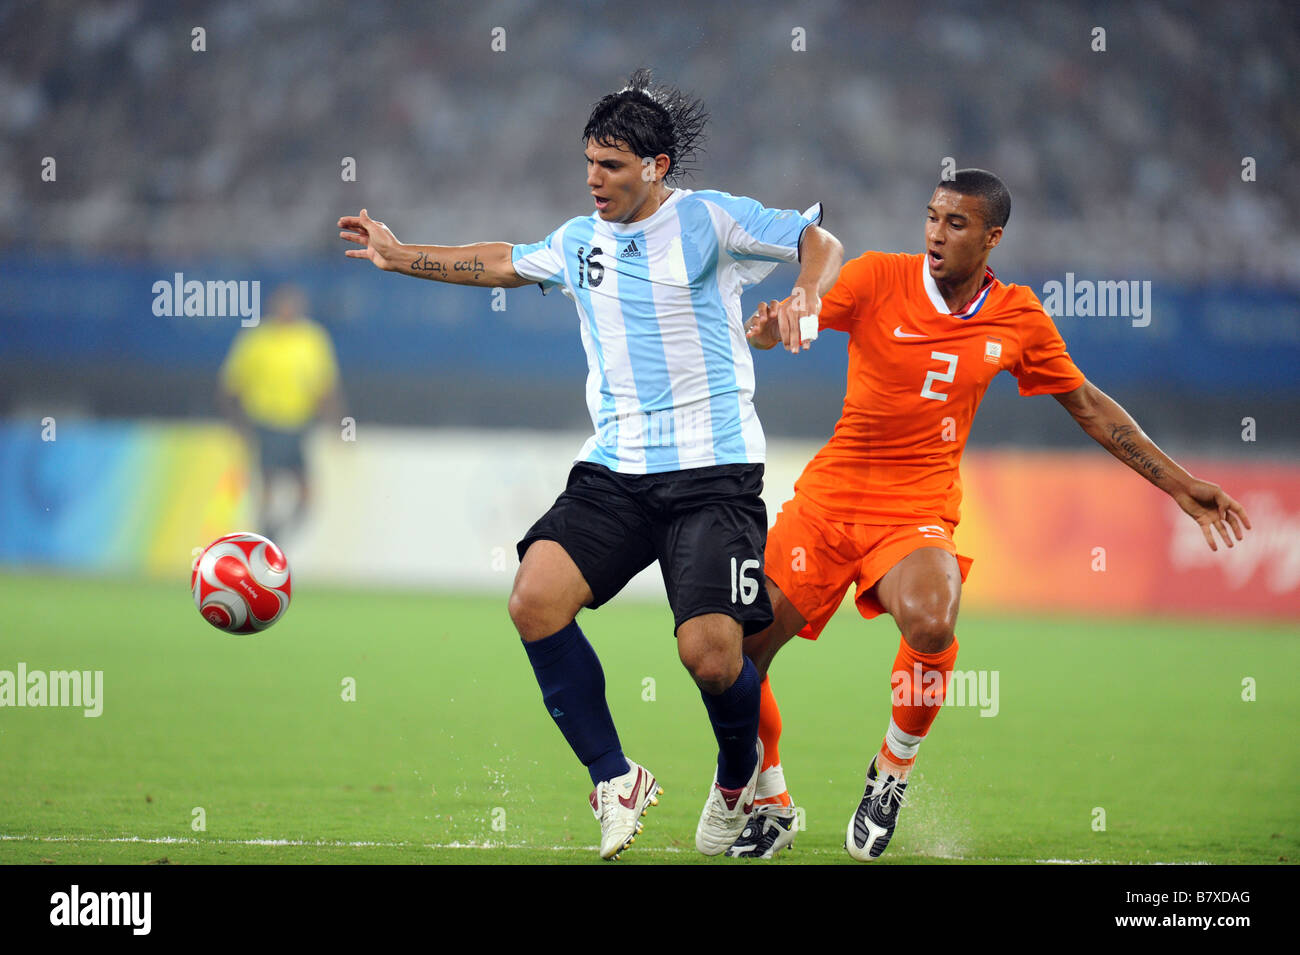 Sergio Aguero ARG AUGUST 16 2008 Football Beijing 2008 Olympic Games Mens Football Quarter Final match between Argentina and Netherlands at Shanghai Stadium in Shanghai China Photo by Atsushi Tomura AFLO SPORT 1035 Stock Photo